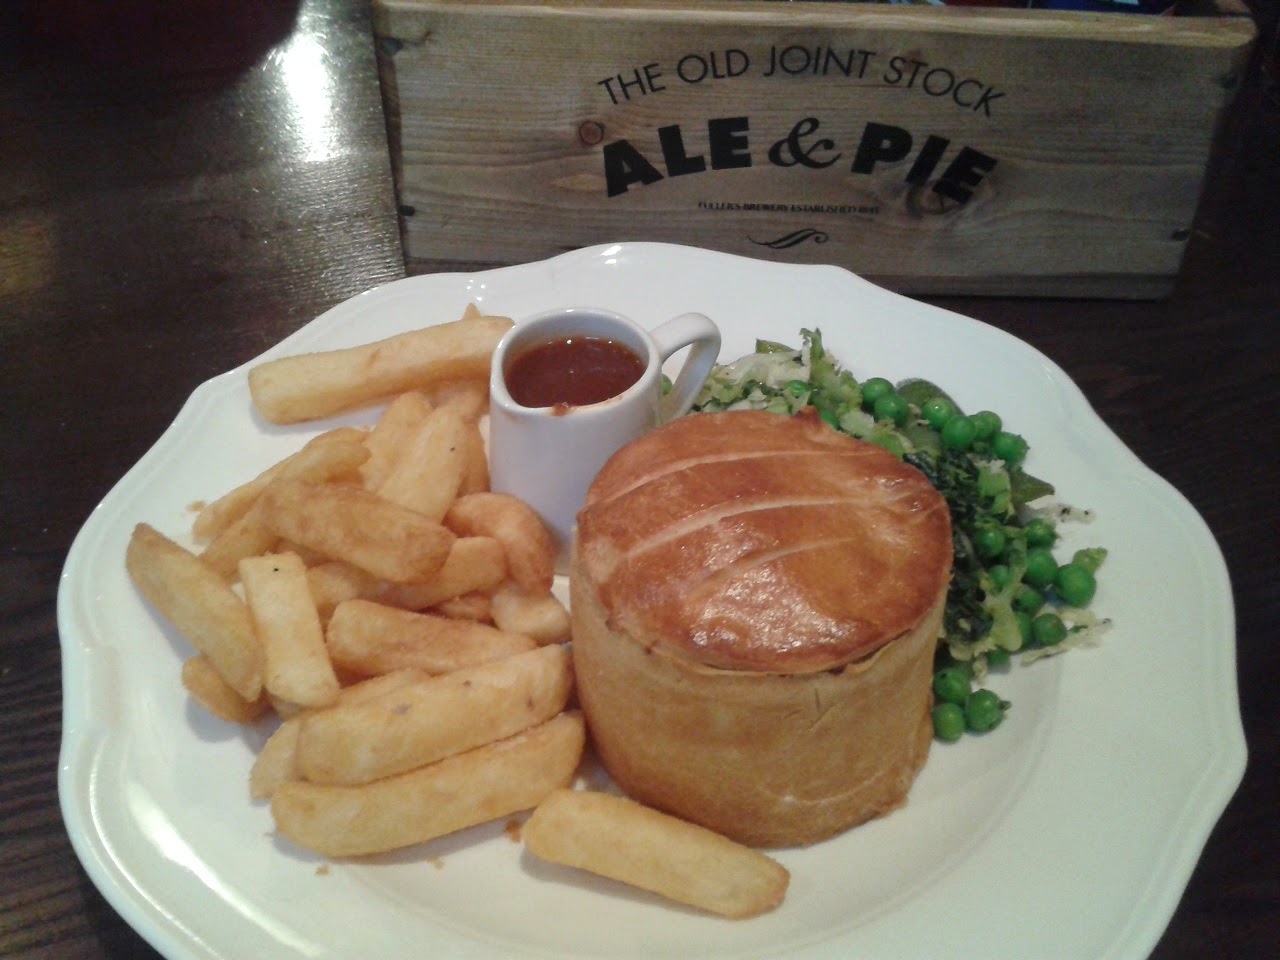 Old Joint Stock Ale and Pie House - Steak Pie Review